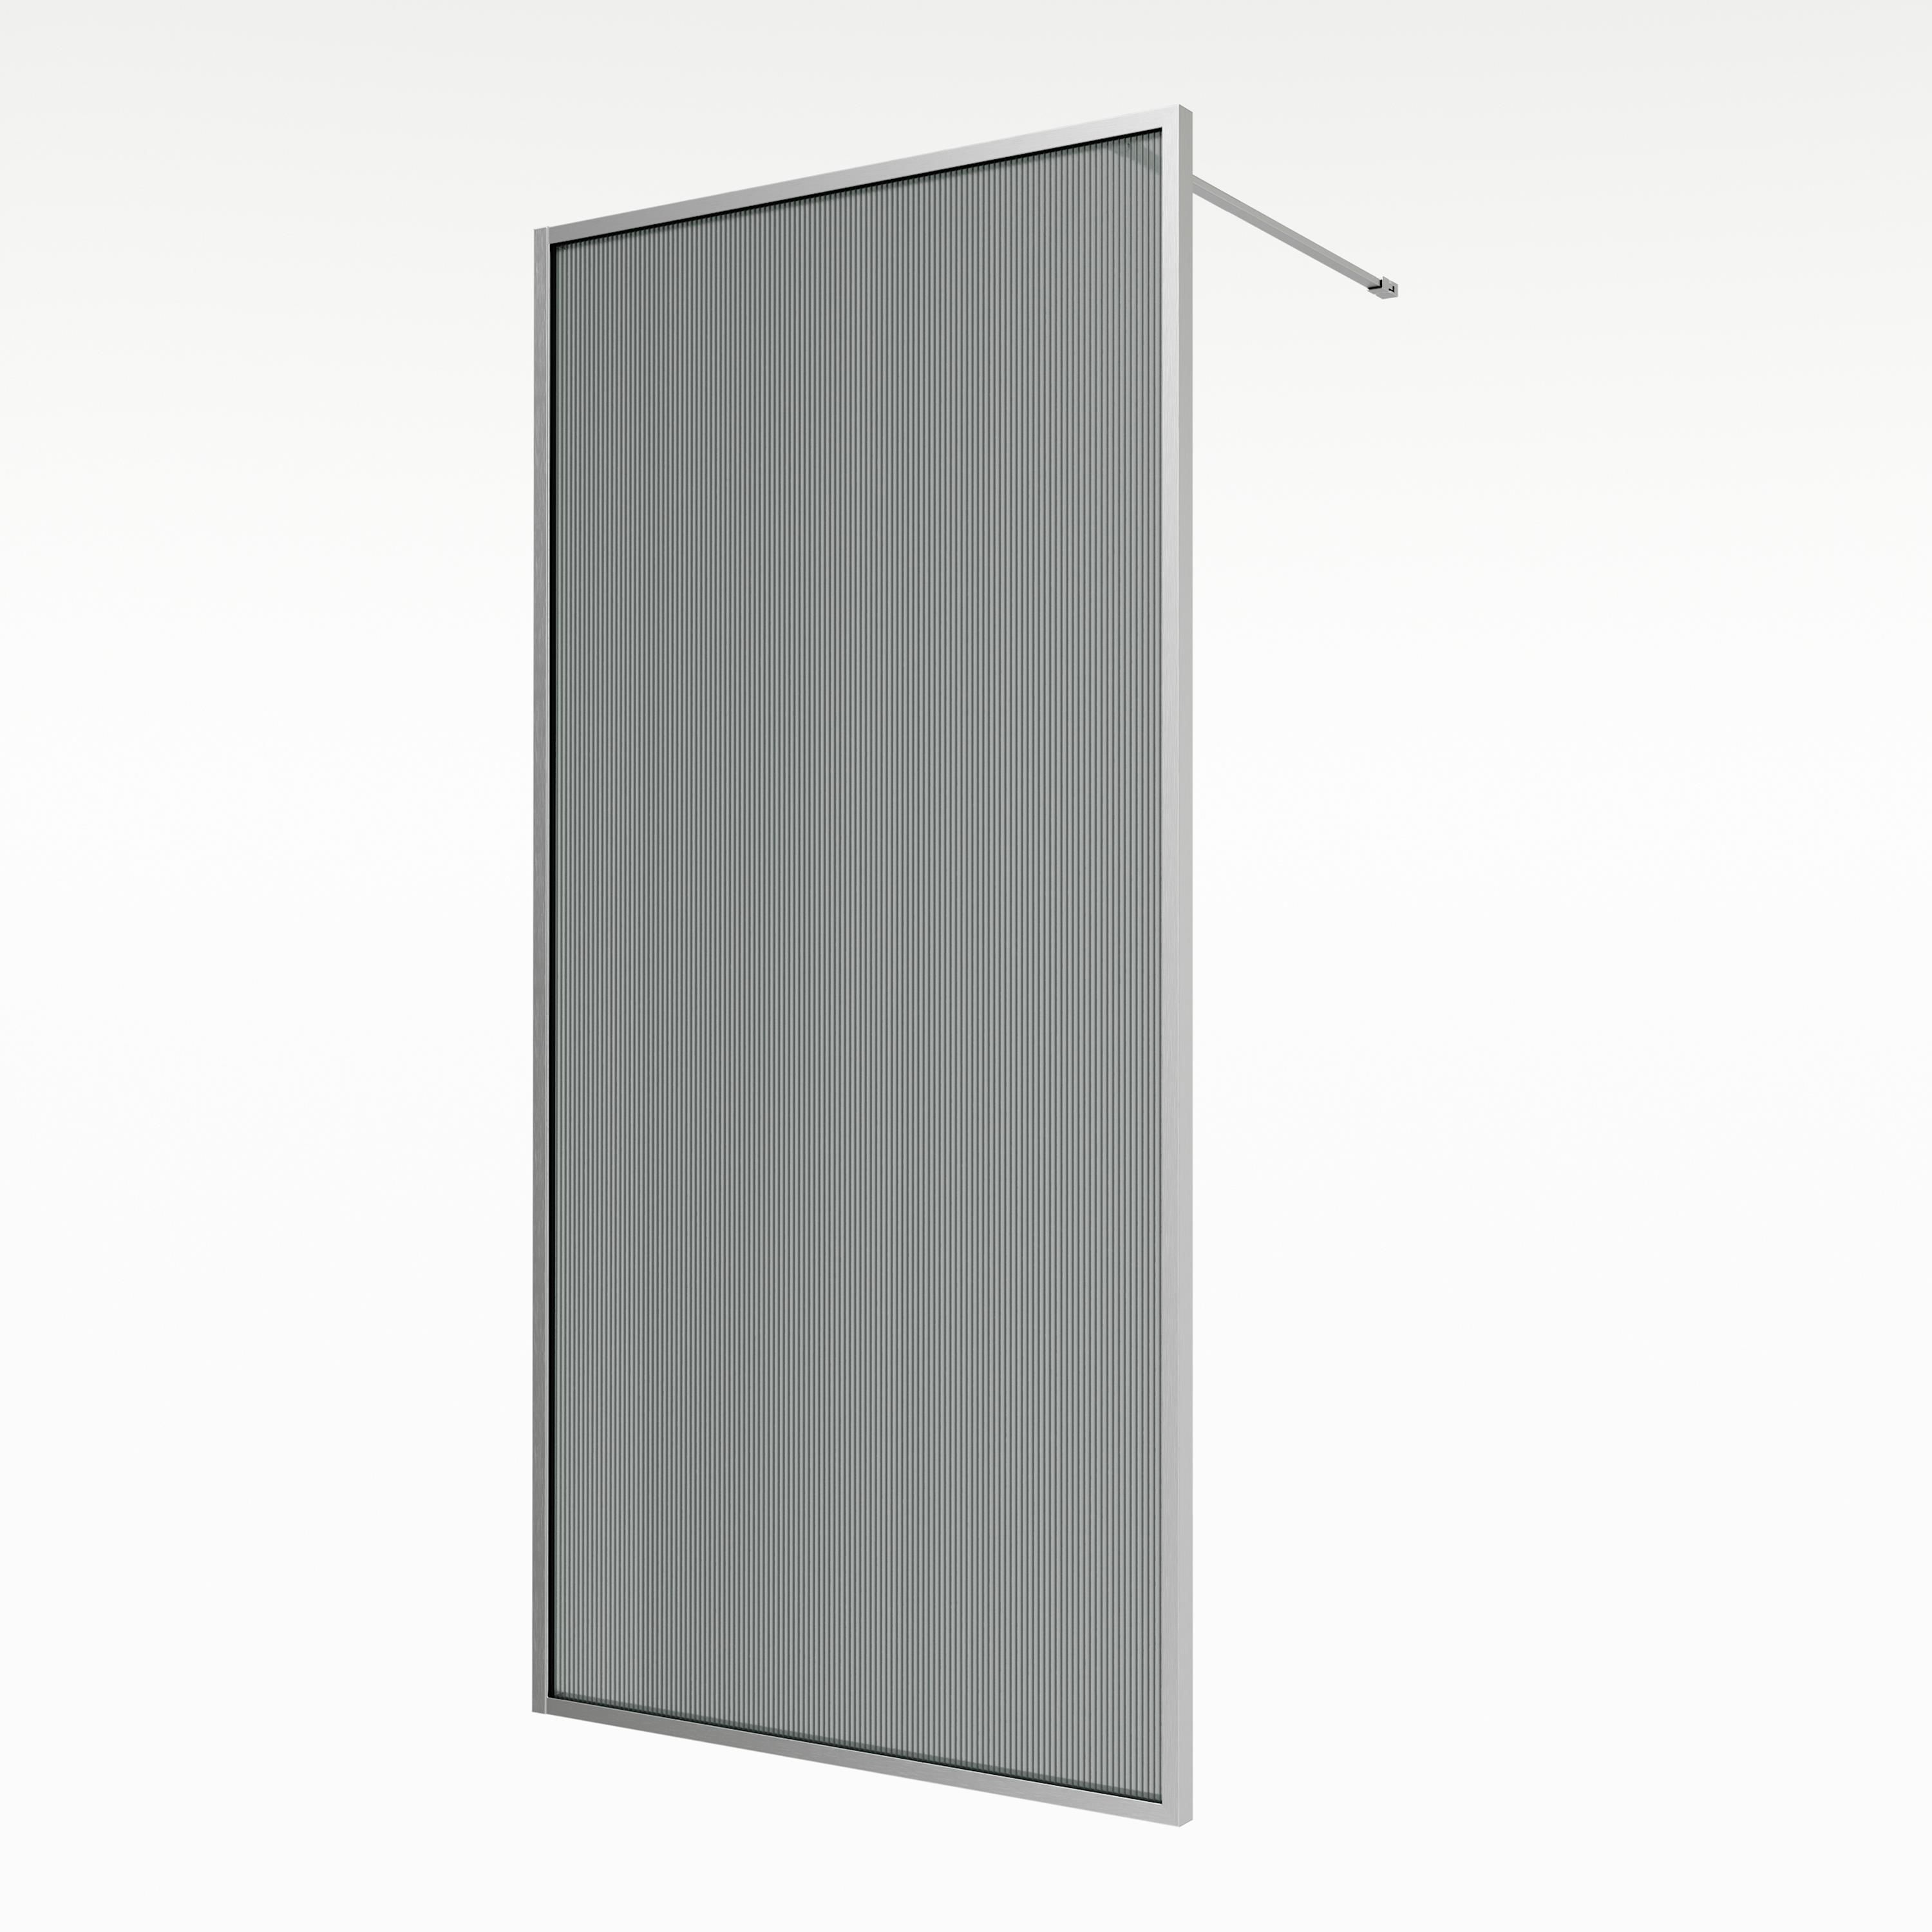 Aqualux AQ PRO Polished Silver Fluted Single Wet room glass screen (H)200cm (W)90cm